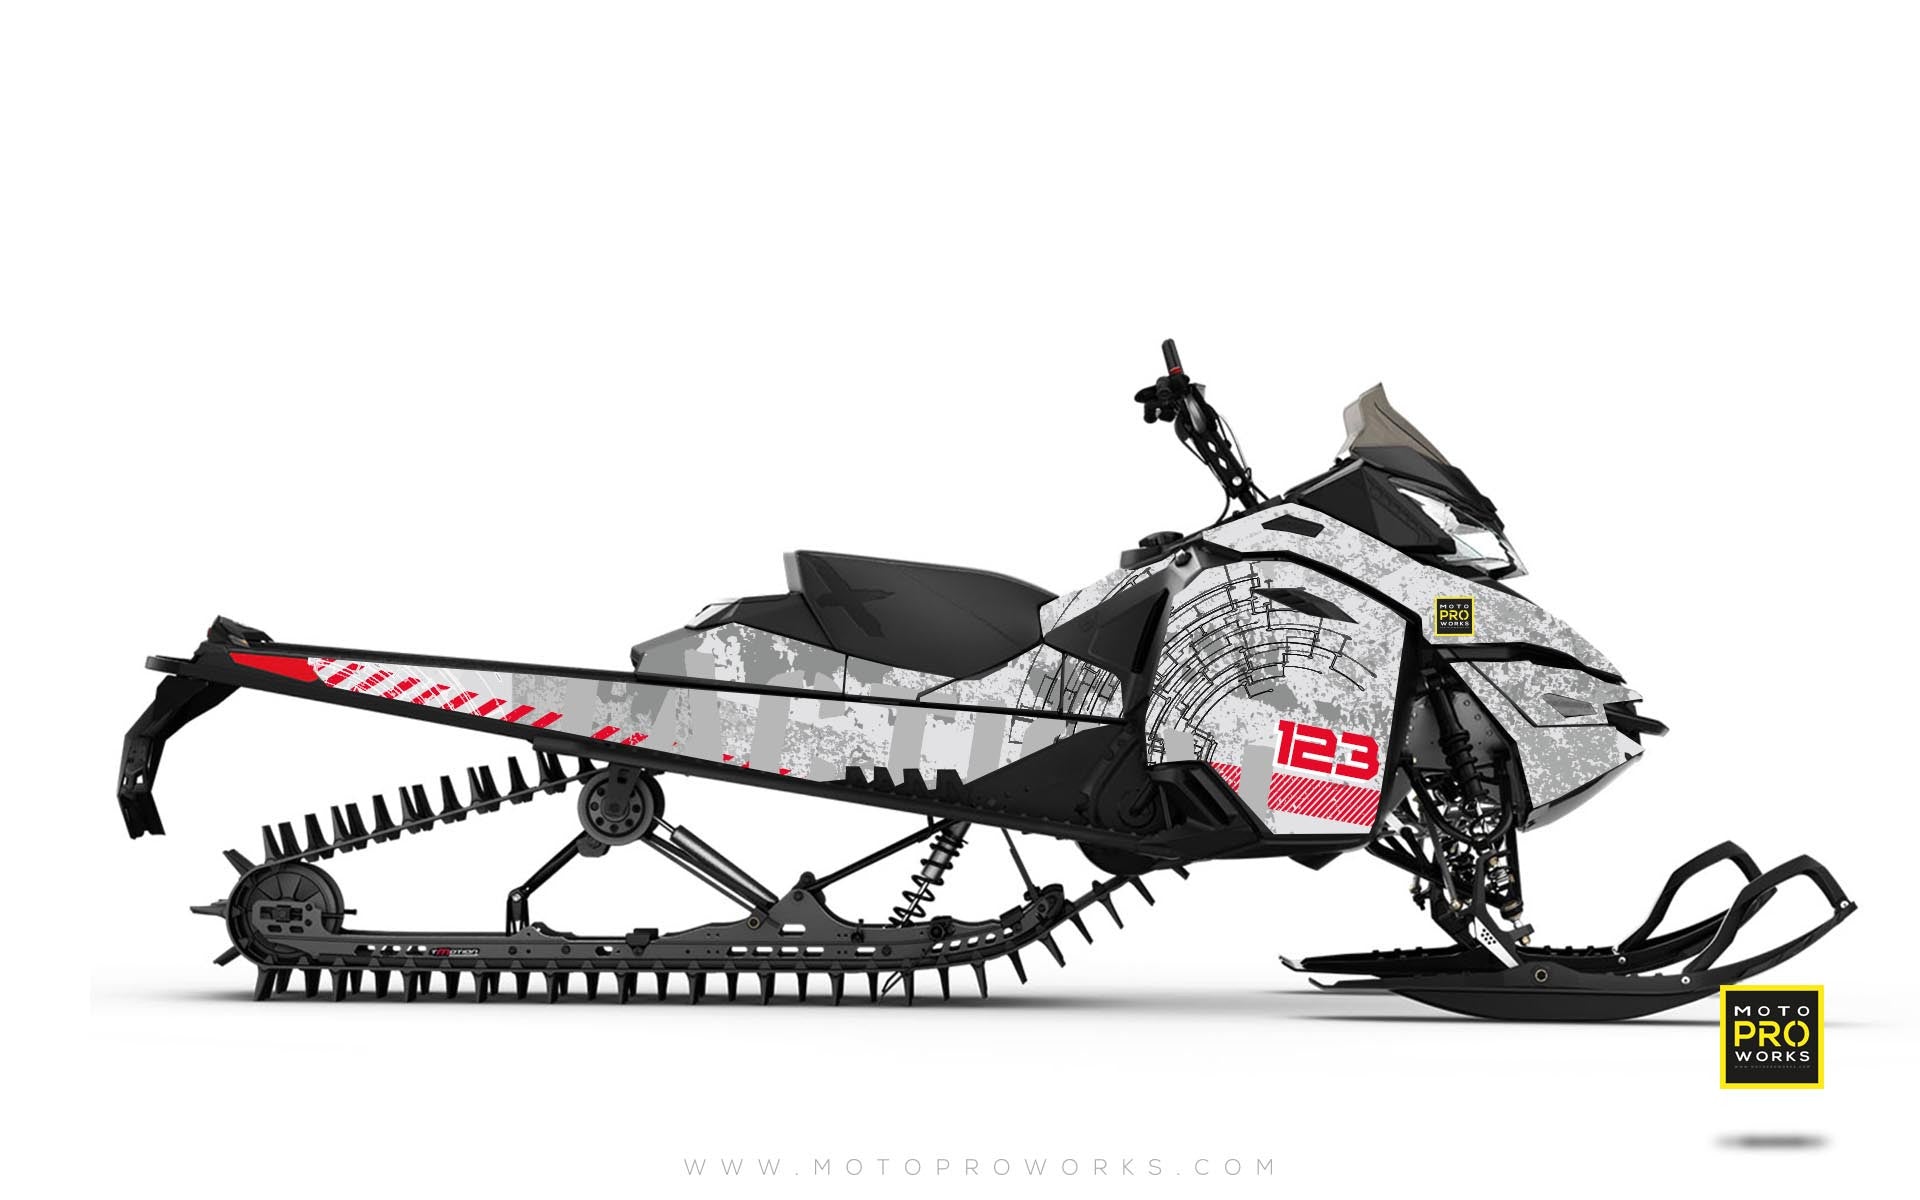 Ski-Doo Graphics - "Tactical" (white) - MotoProWorks | Decals and Bike Graphic kit